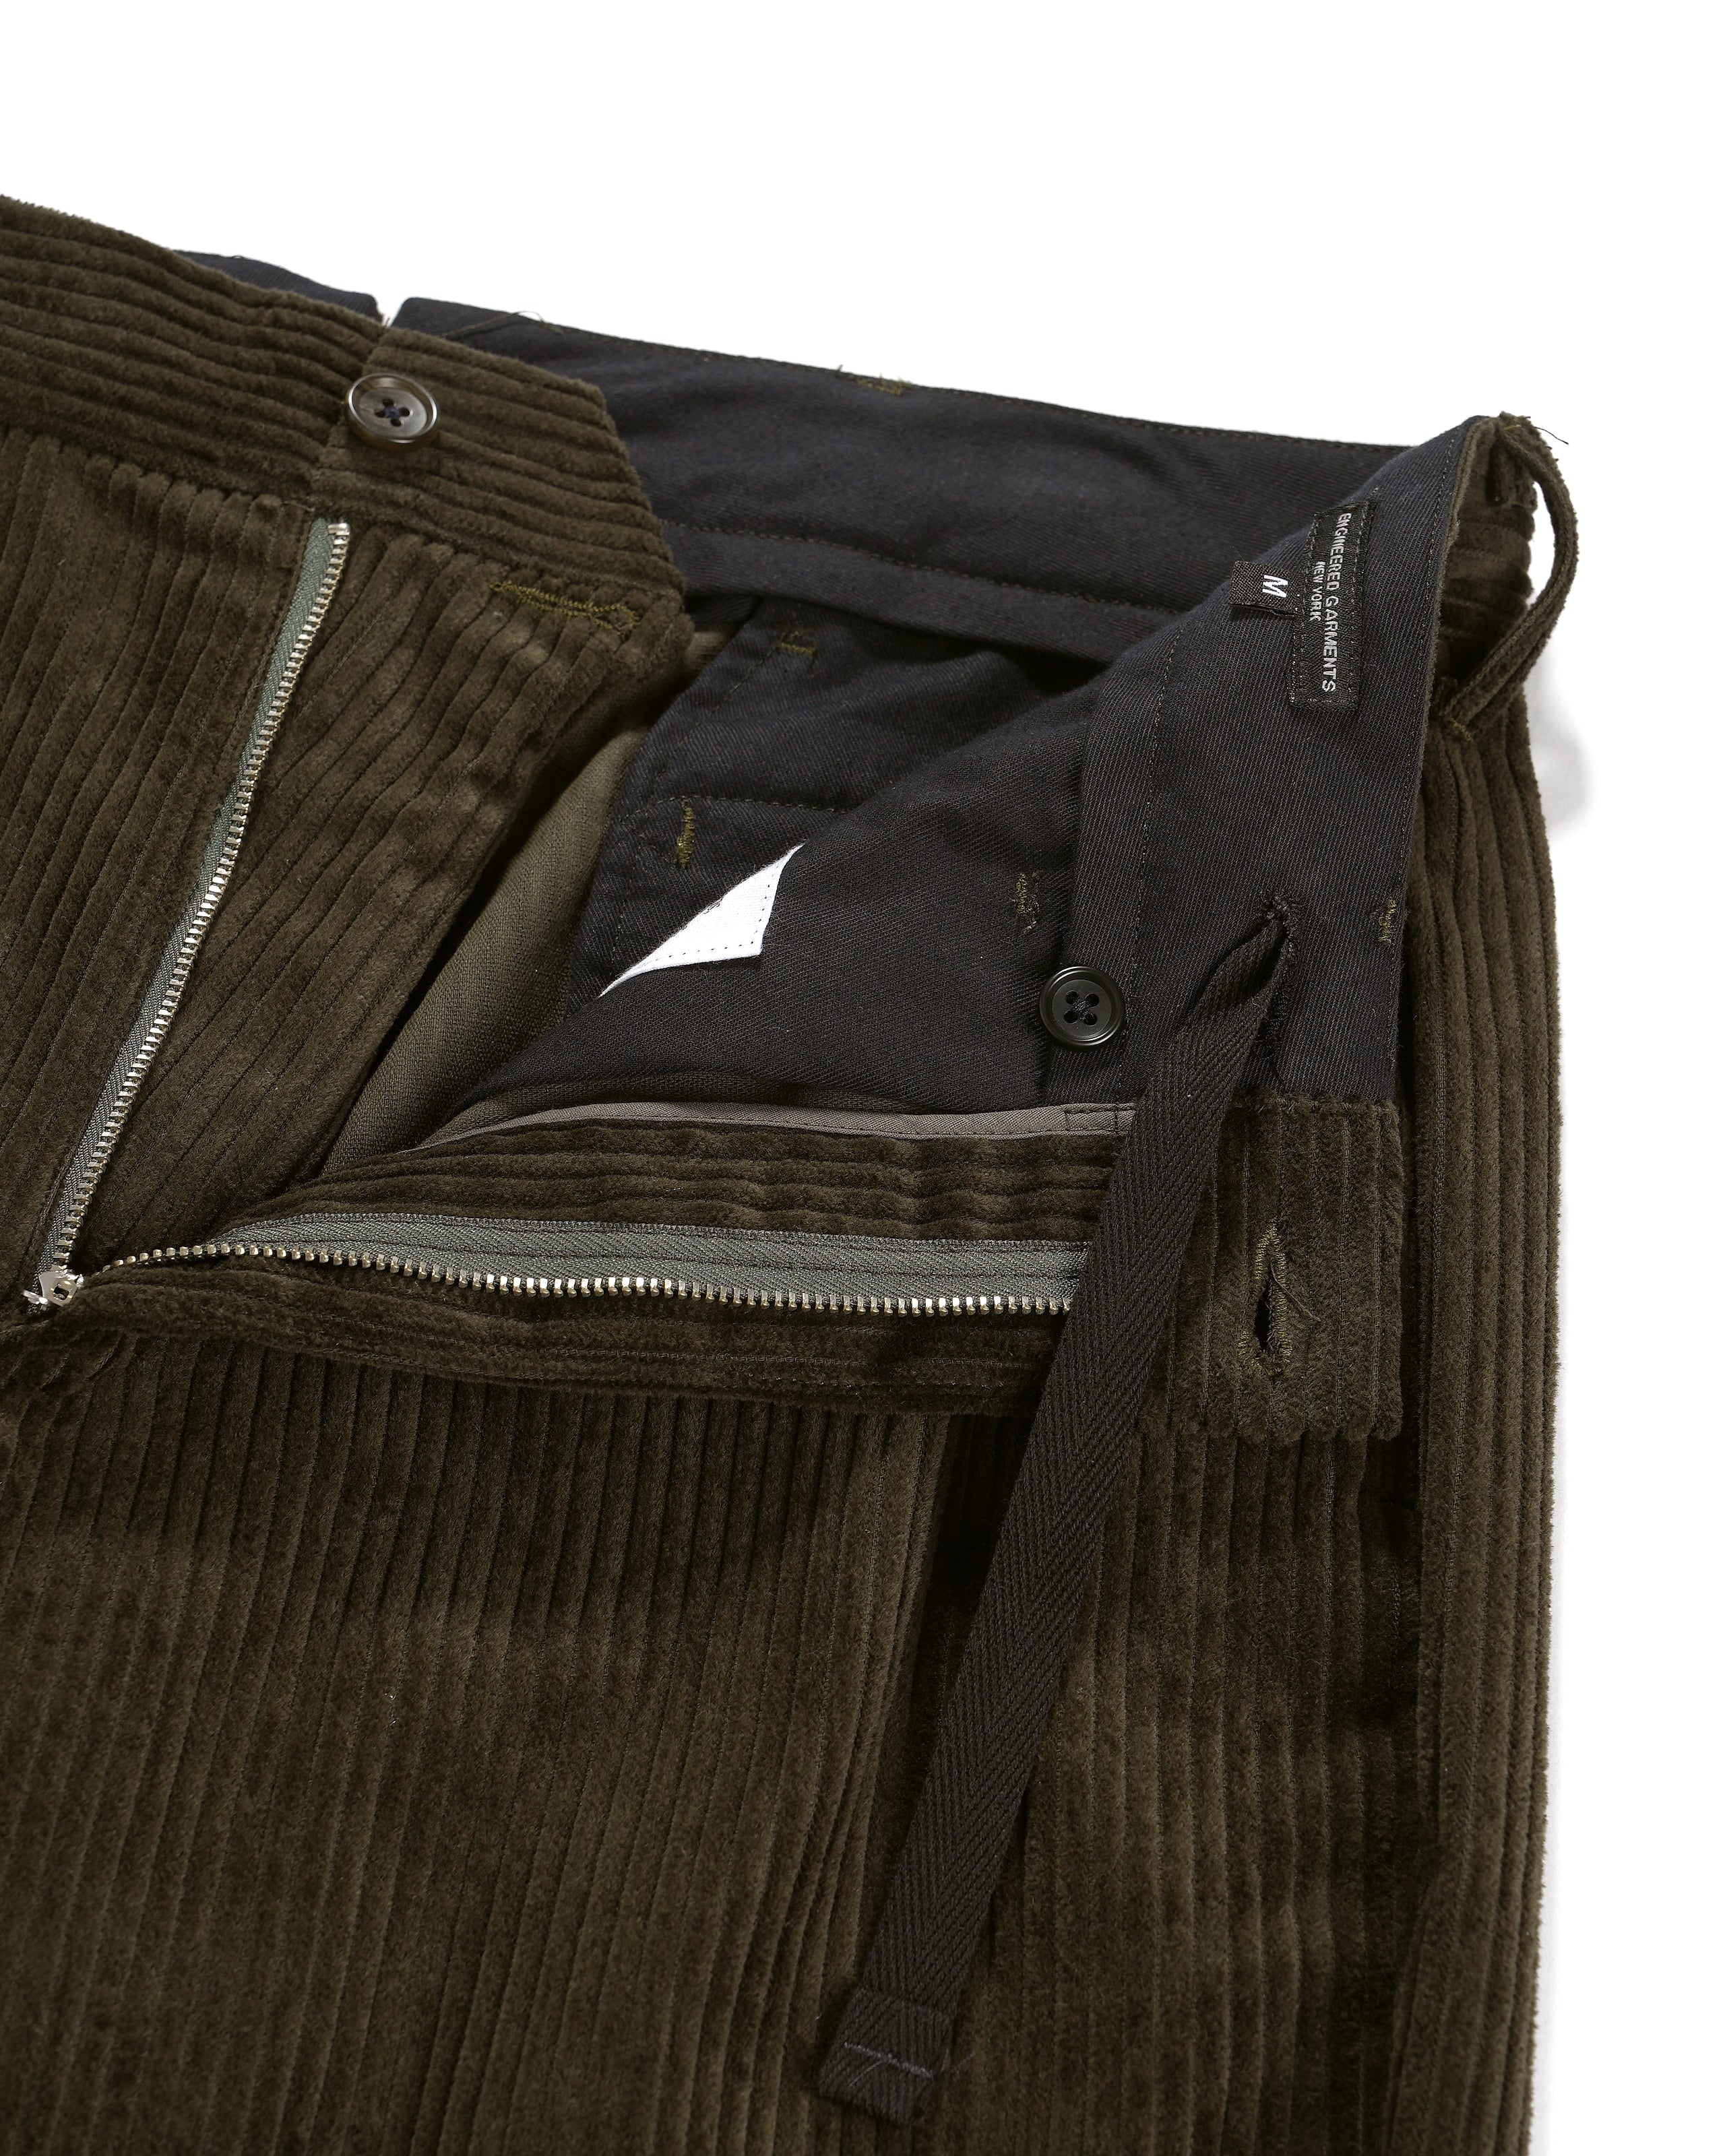 Engineered Garments Andover Pant - Olive Cotton 4.5W Corduroy